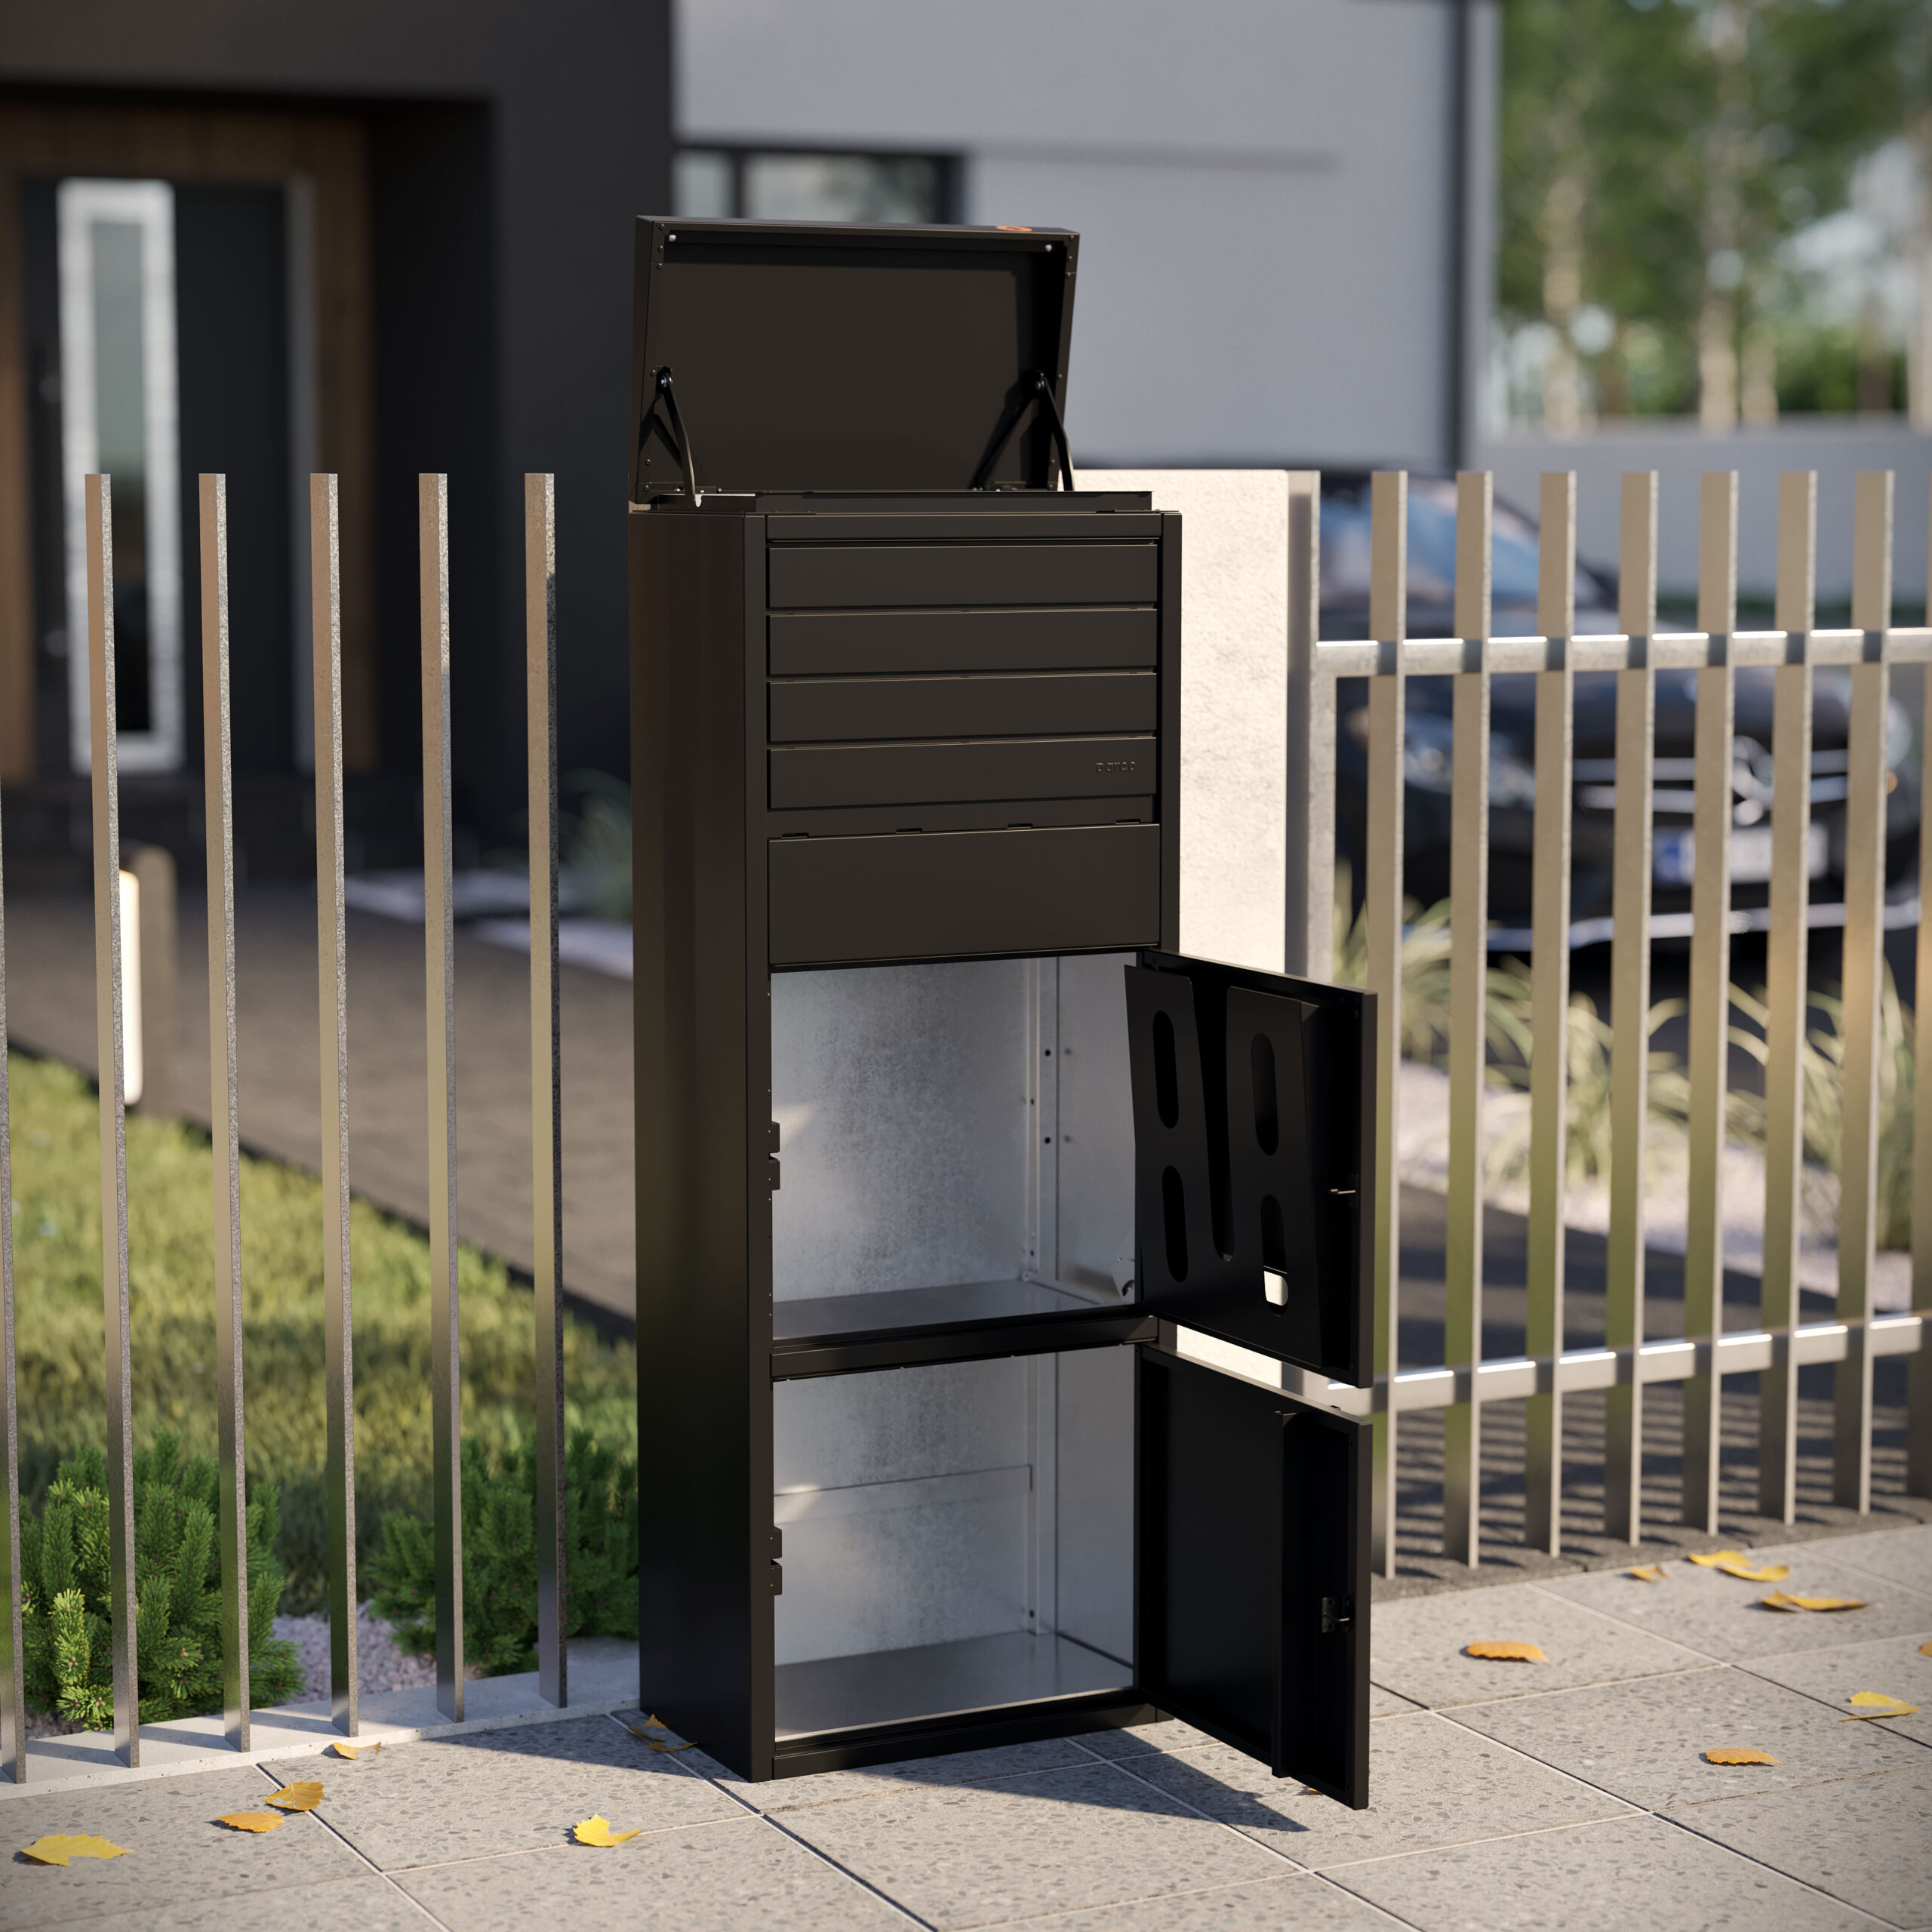 tin box rendering 3d visualization exterior product